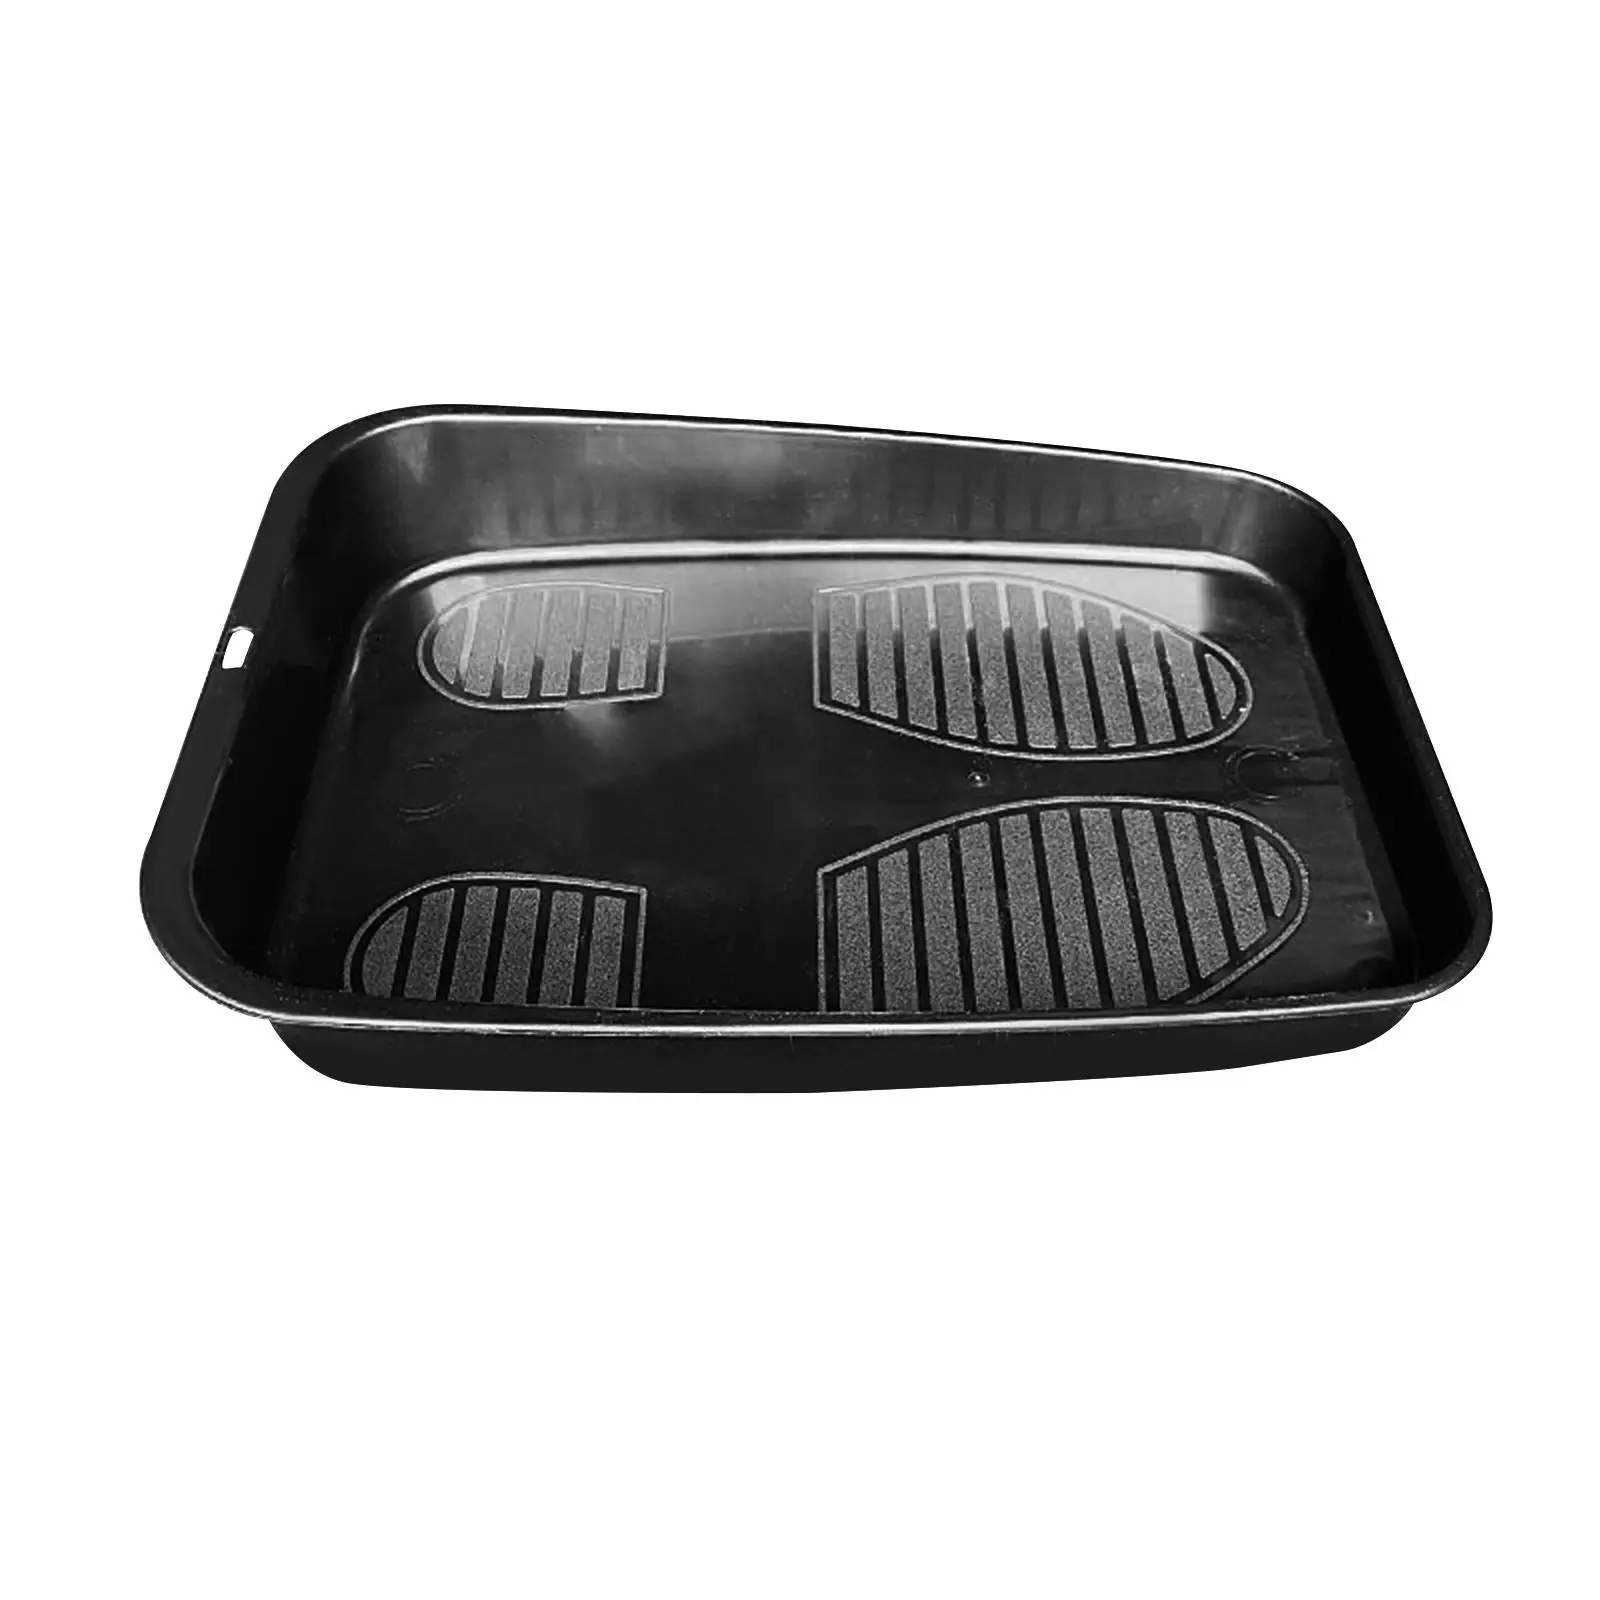 Car Shoes Storage Tray Easy to Easy Accessories Stowing Storage Box Multifunctional Container